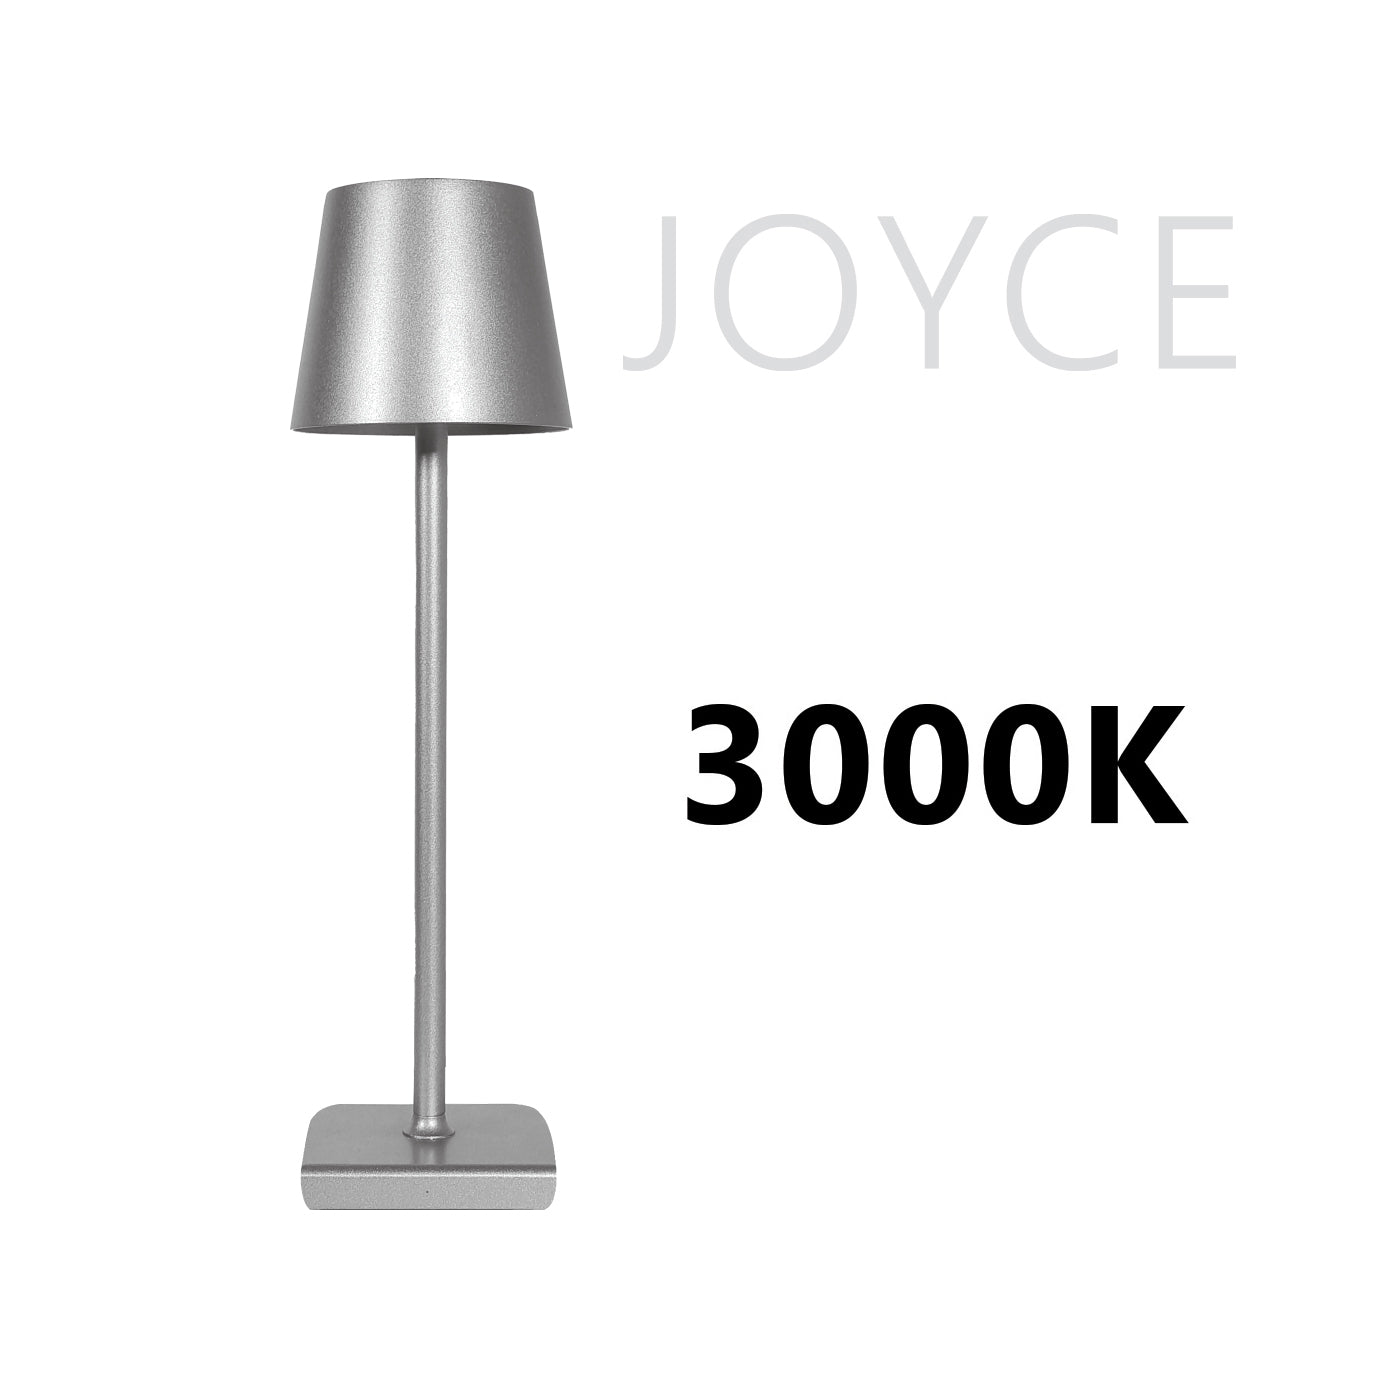 Dimmable LED table lamp - Joyce - 